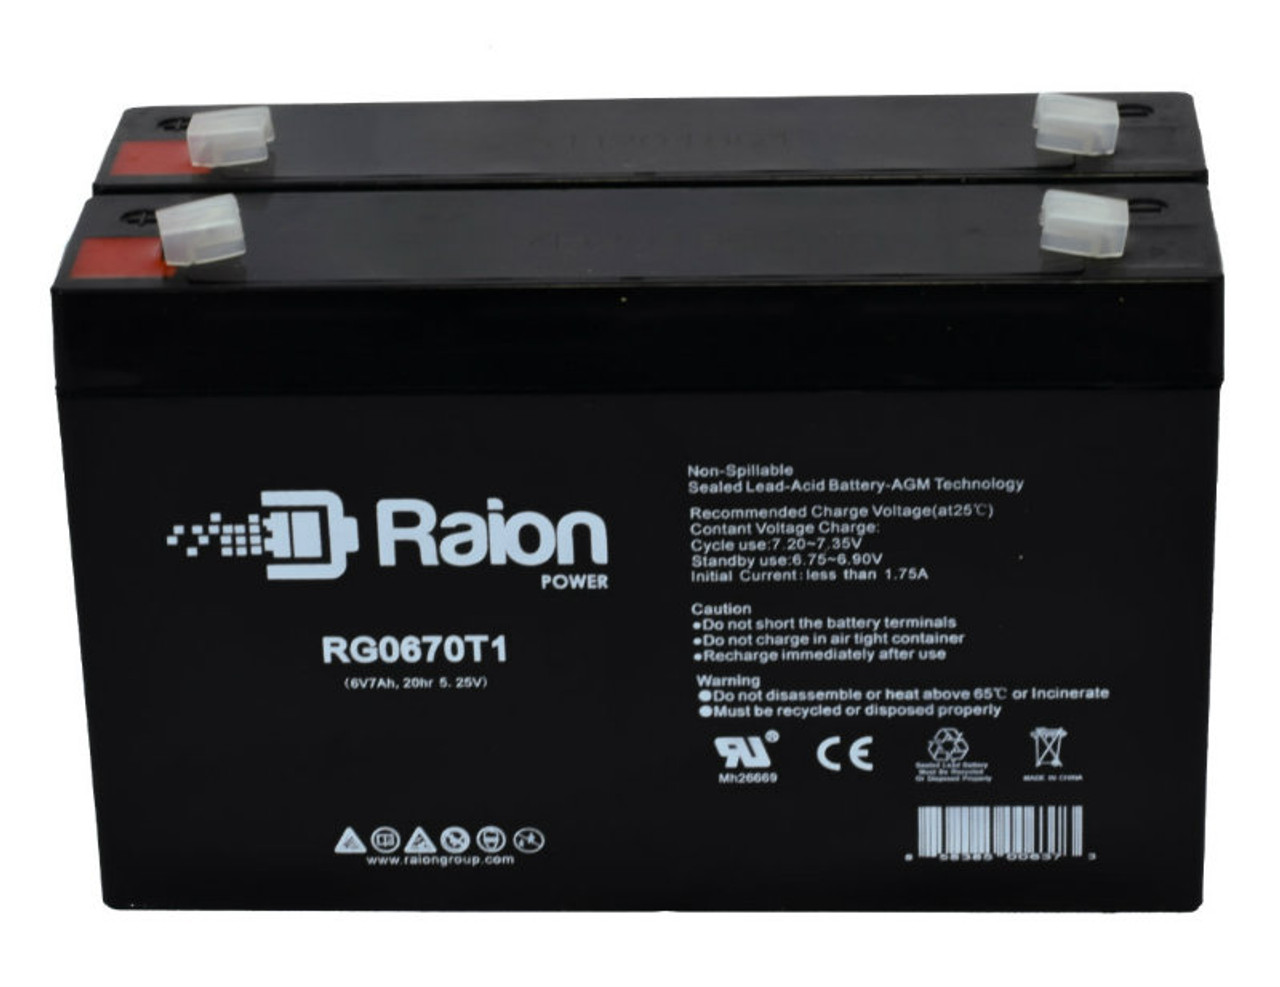 Raion Power RG0670T1 6V 7Ah Replacement Battery for McGaw Accu Pro Infusion Pump - 2 Pack